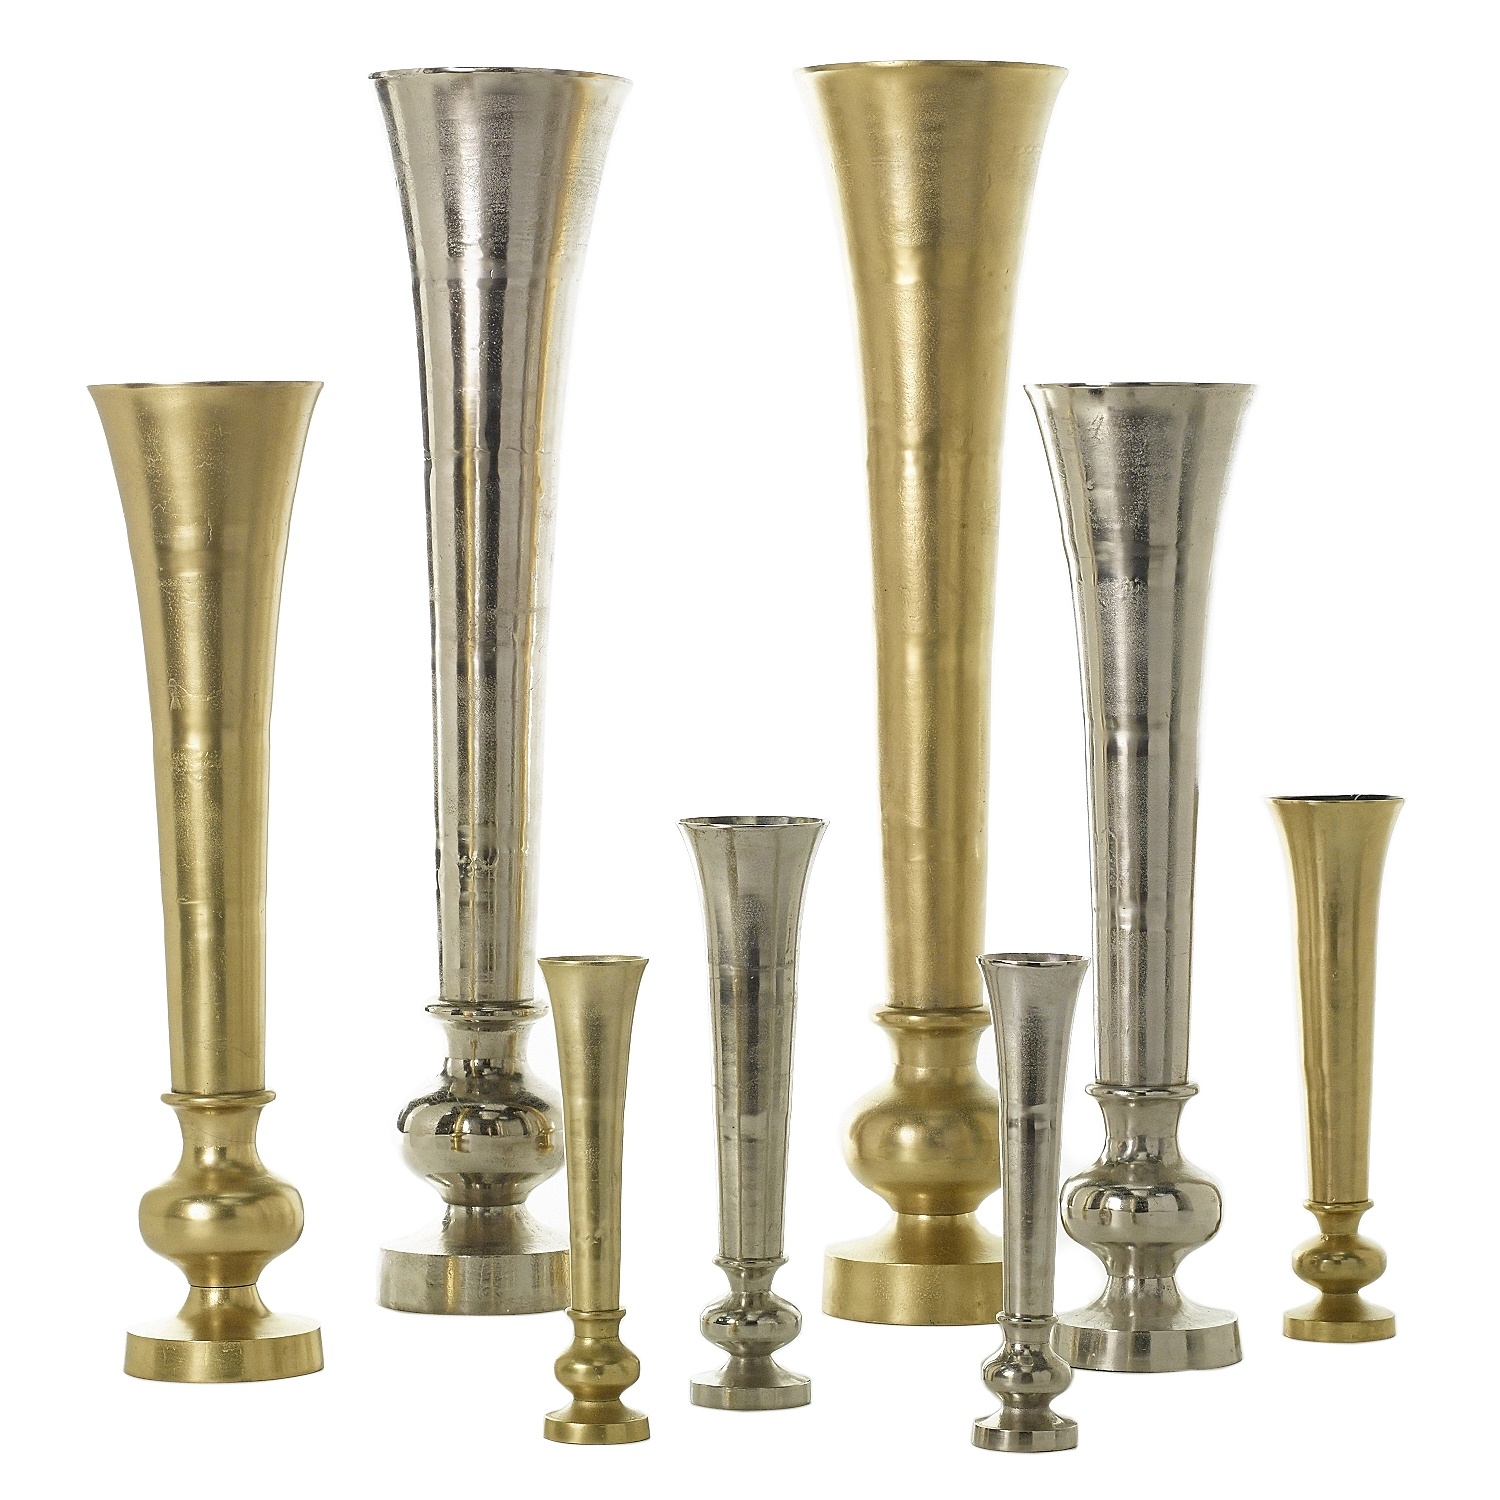 Monumental Floor Vase Collection with regard to sizing 1500 X 1500